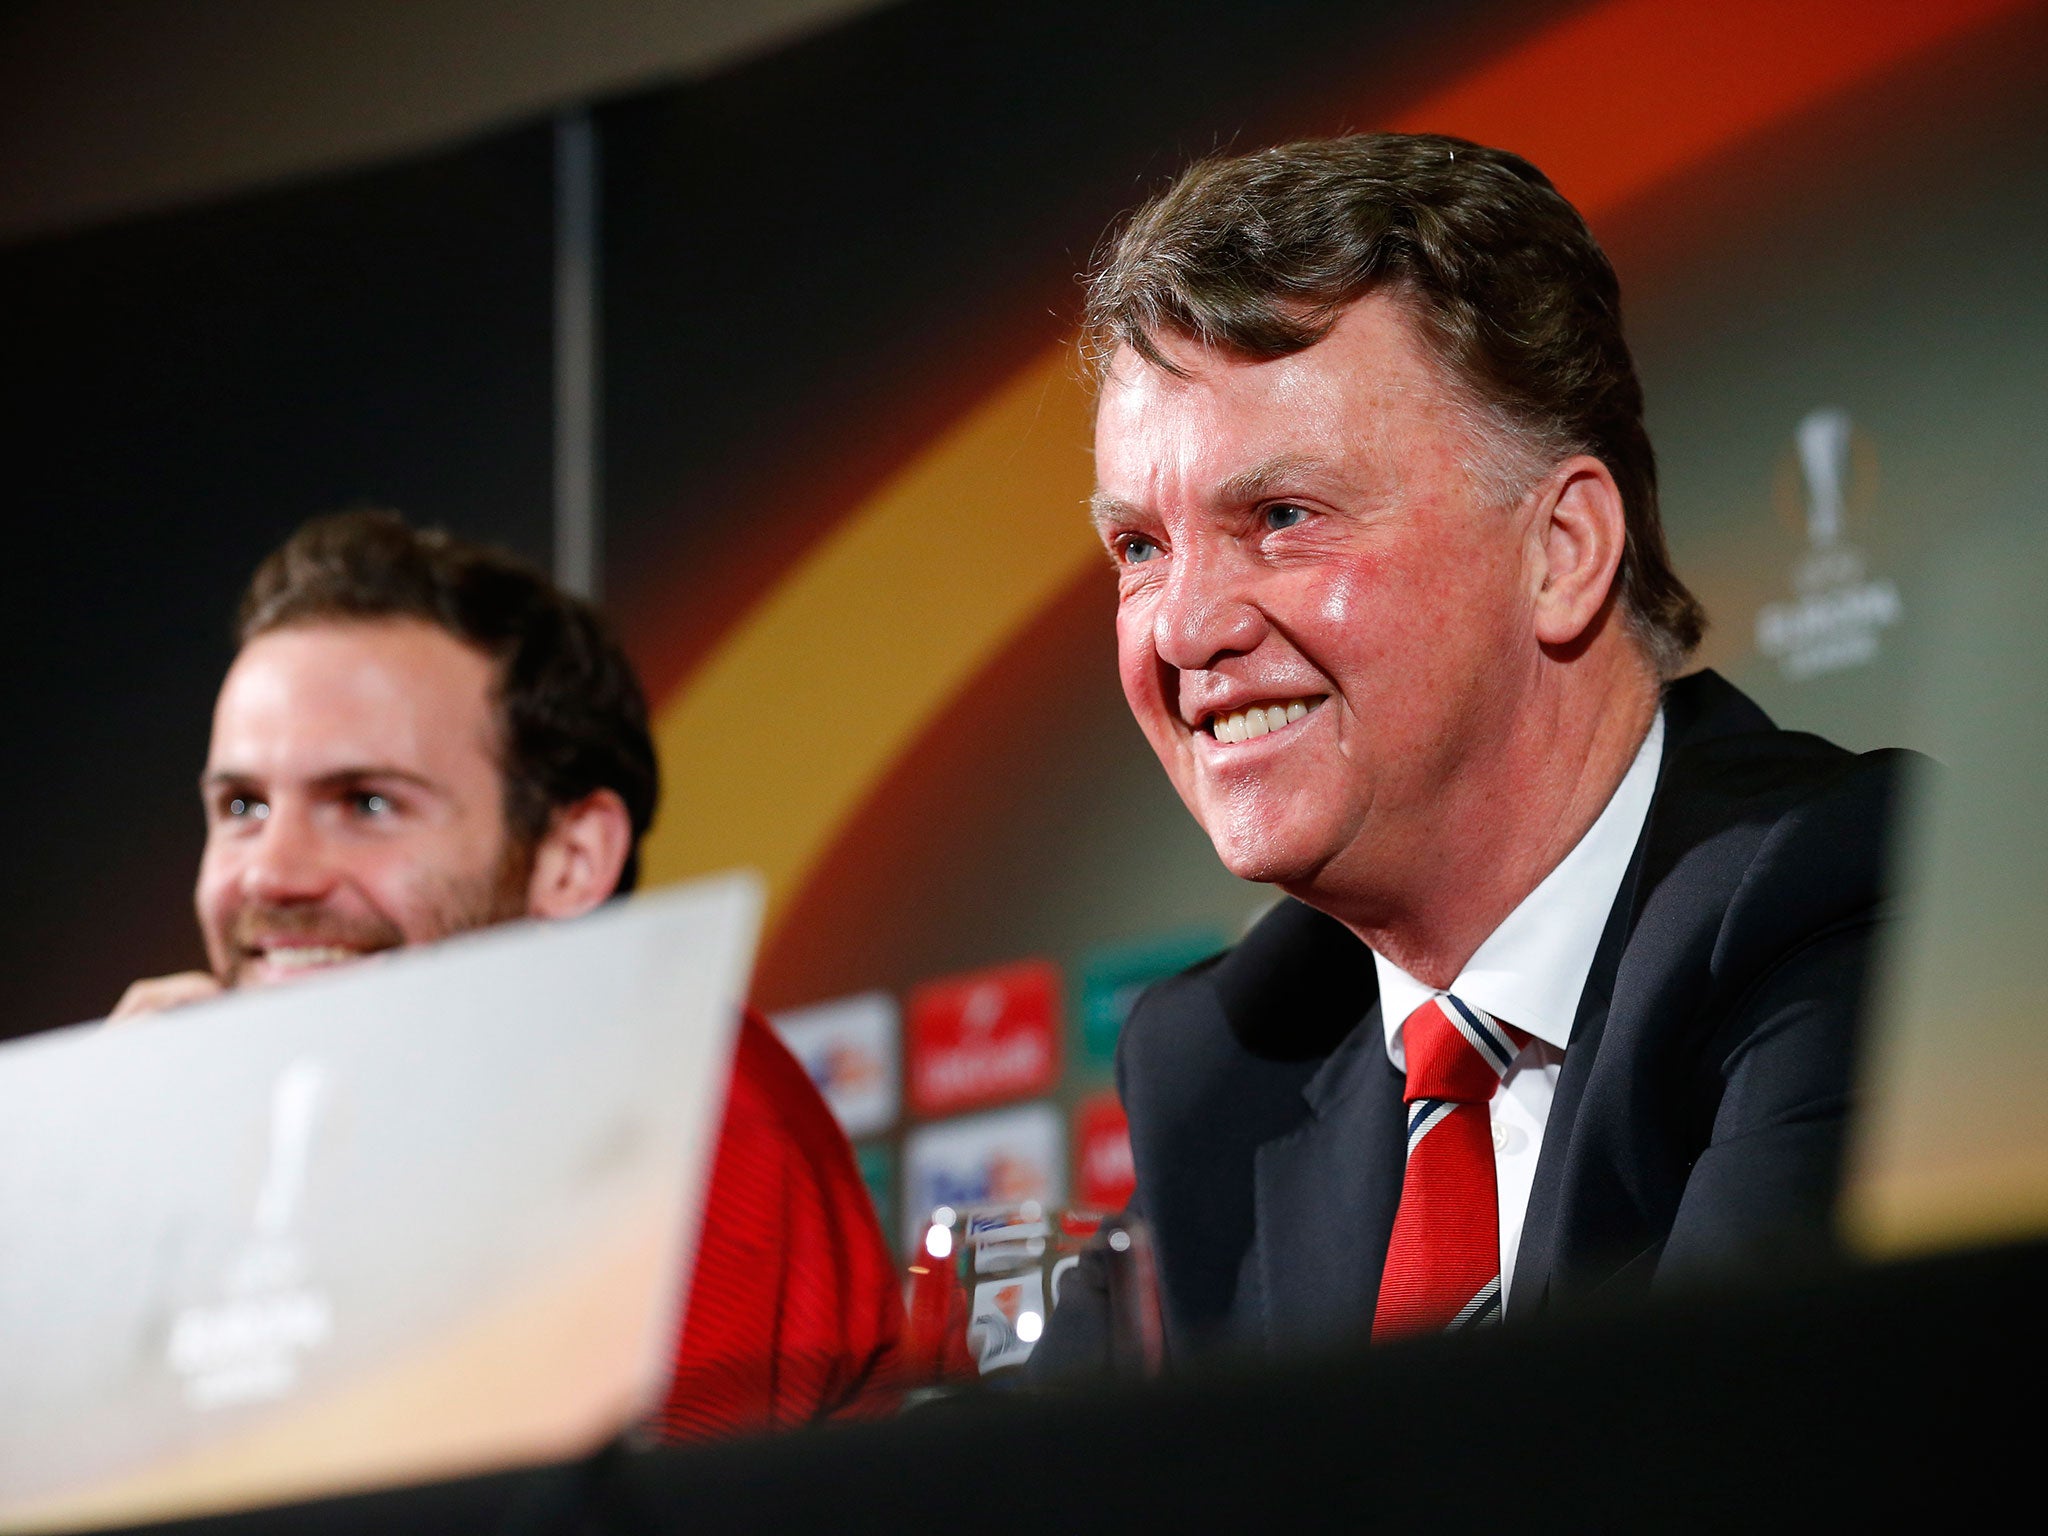 Manchester United manager Louis van Gaal takes his press conference